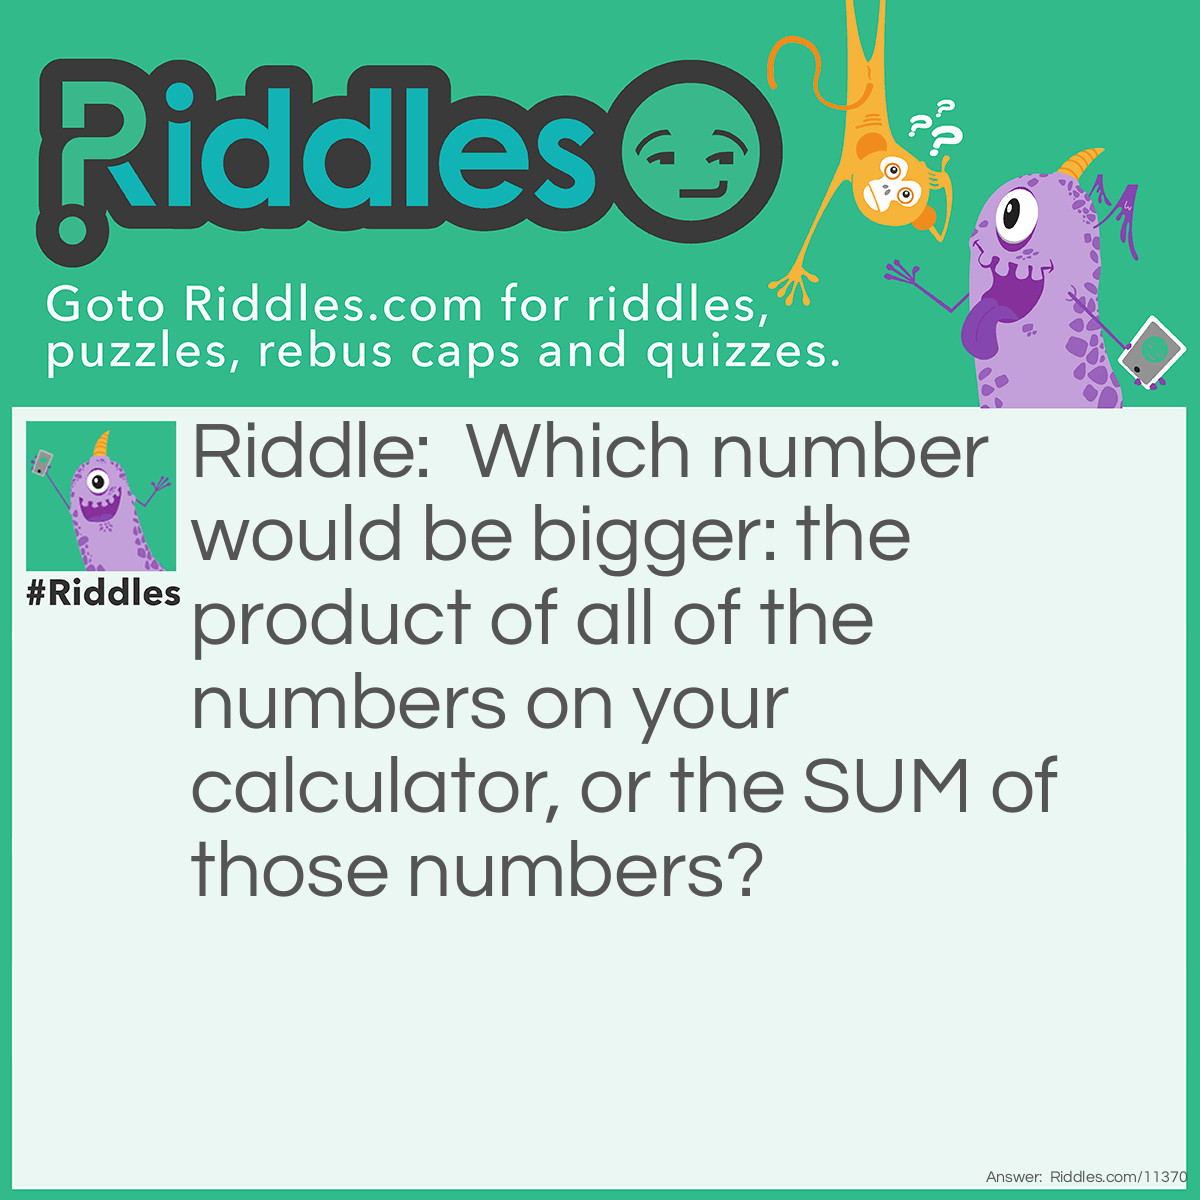 Riddle: Which number would be bigger: the product of all of the numbers on your calculator, or the SUM of those numbers? Answer: The sum would be bigger because multiplying any number by zero always results in zero. Yes, you have to include zero; it is also a number on your calculator.